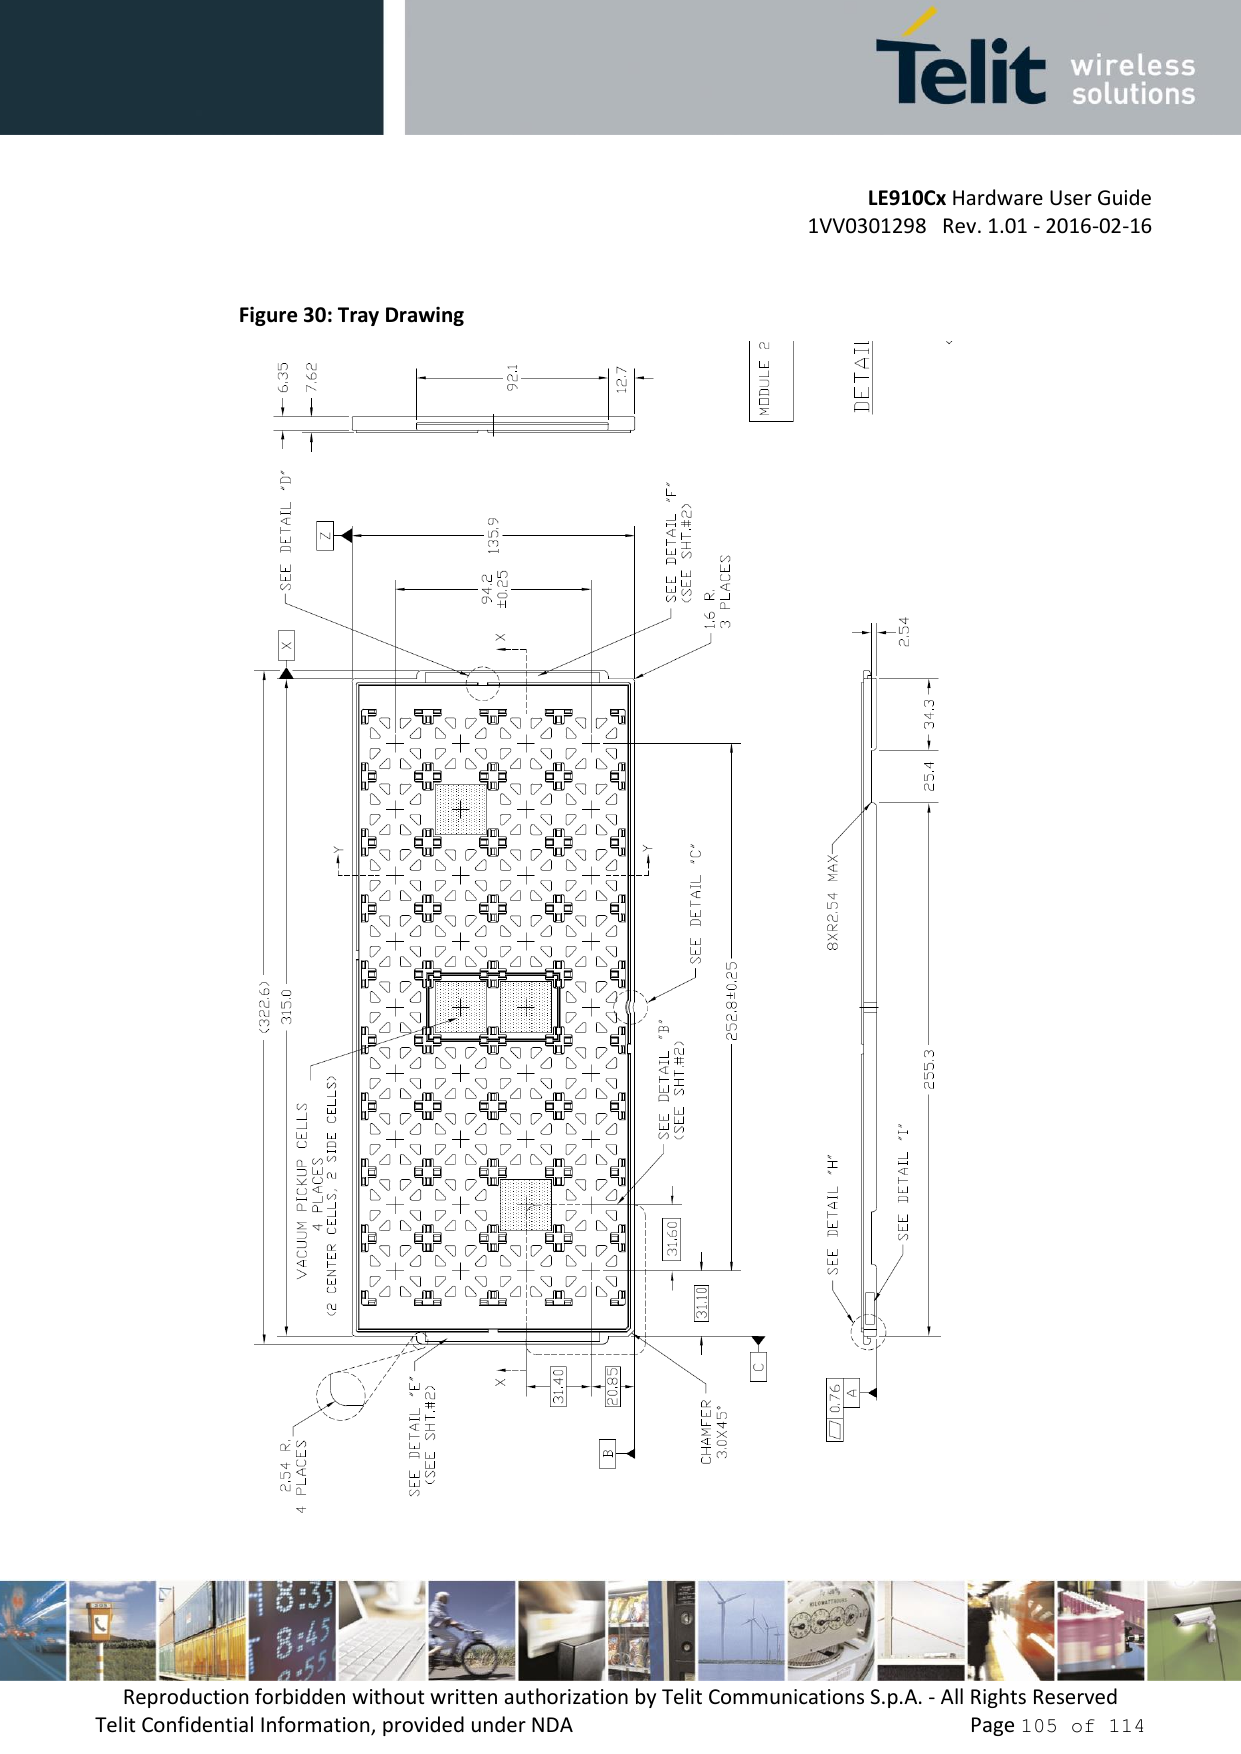 LE910Cx Hardware User Guide 1VV0301298   Rev. 1.01 - 2016-02-16 Reproduction forbidden without written authorization by Telit Communications S.p.A. - All Rights Reserved Telit Confidential Information, provided under NDA   Page 105 of 114 Figure 30: Tray Drawing 